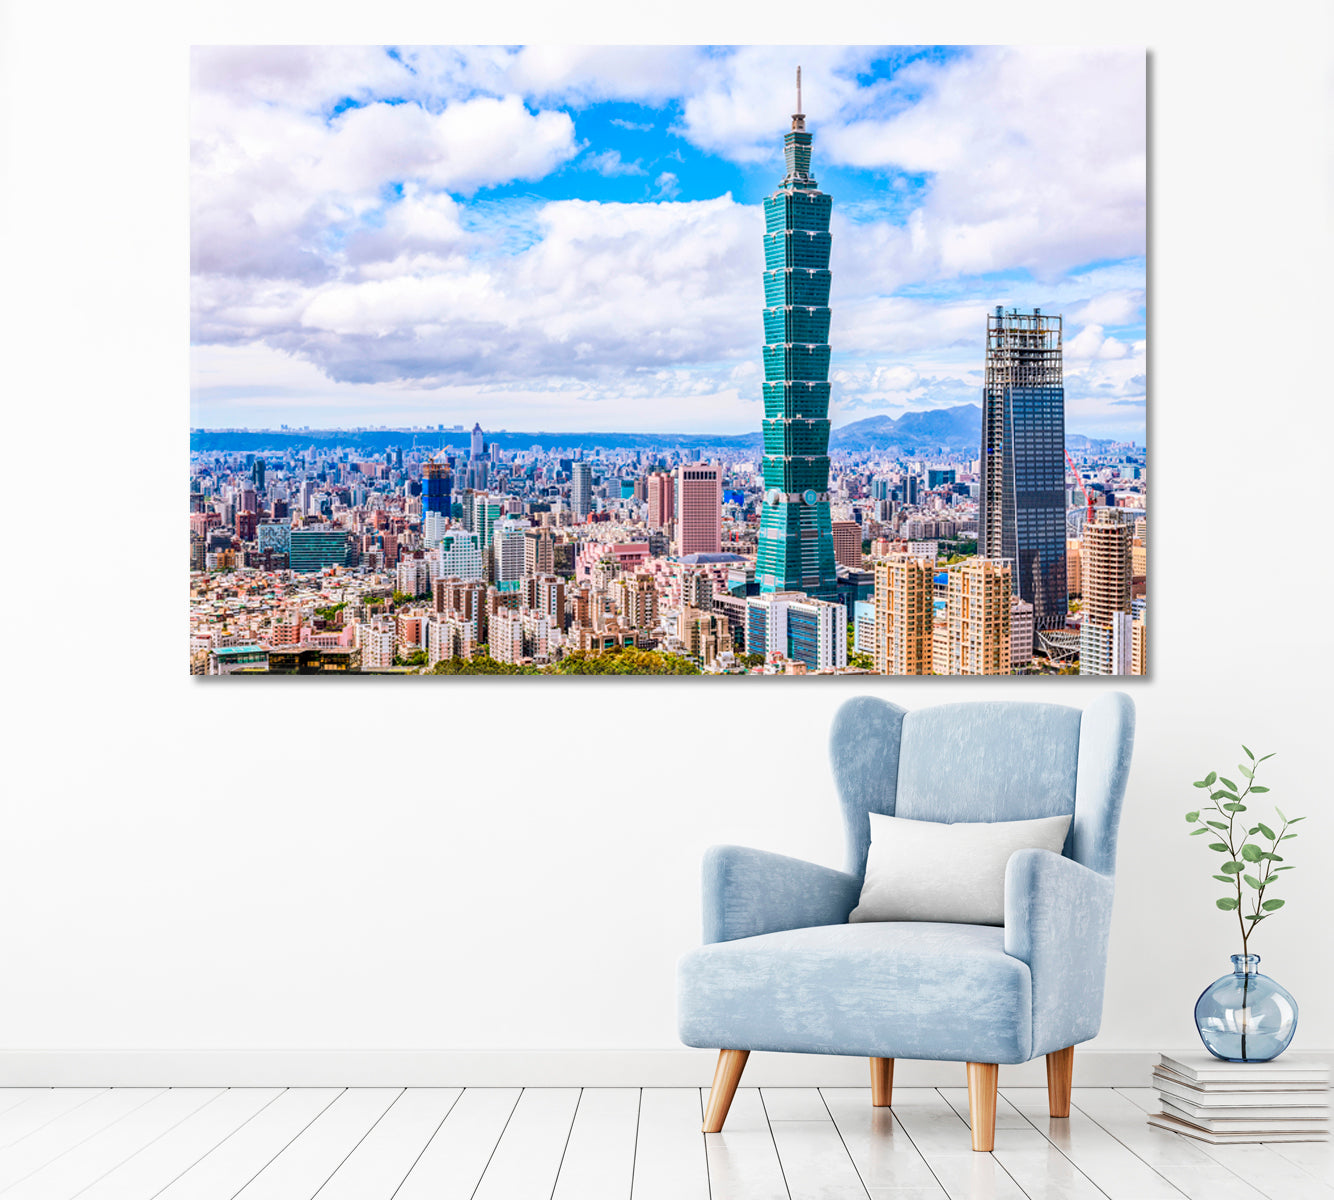 Taipei Downtown with Taipei 101 Skyscraper Canvas Print ArtLexy 1 Panel 24"x16" inches 